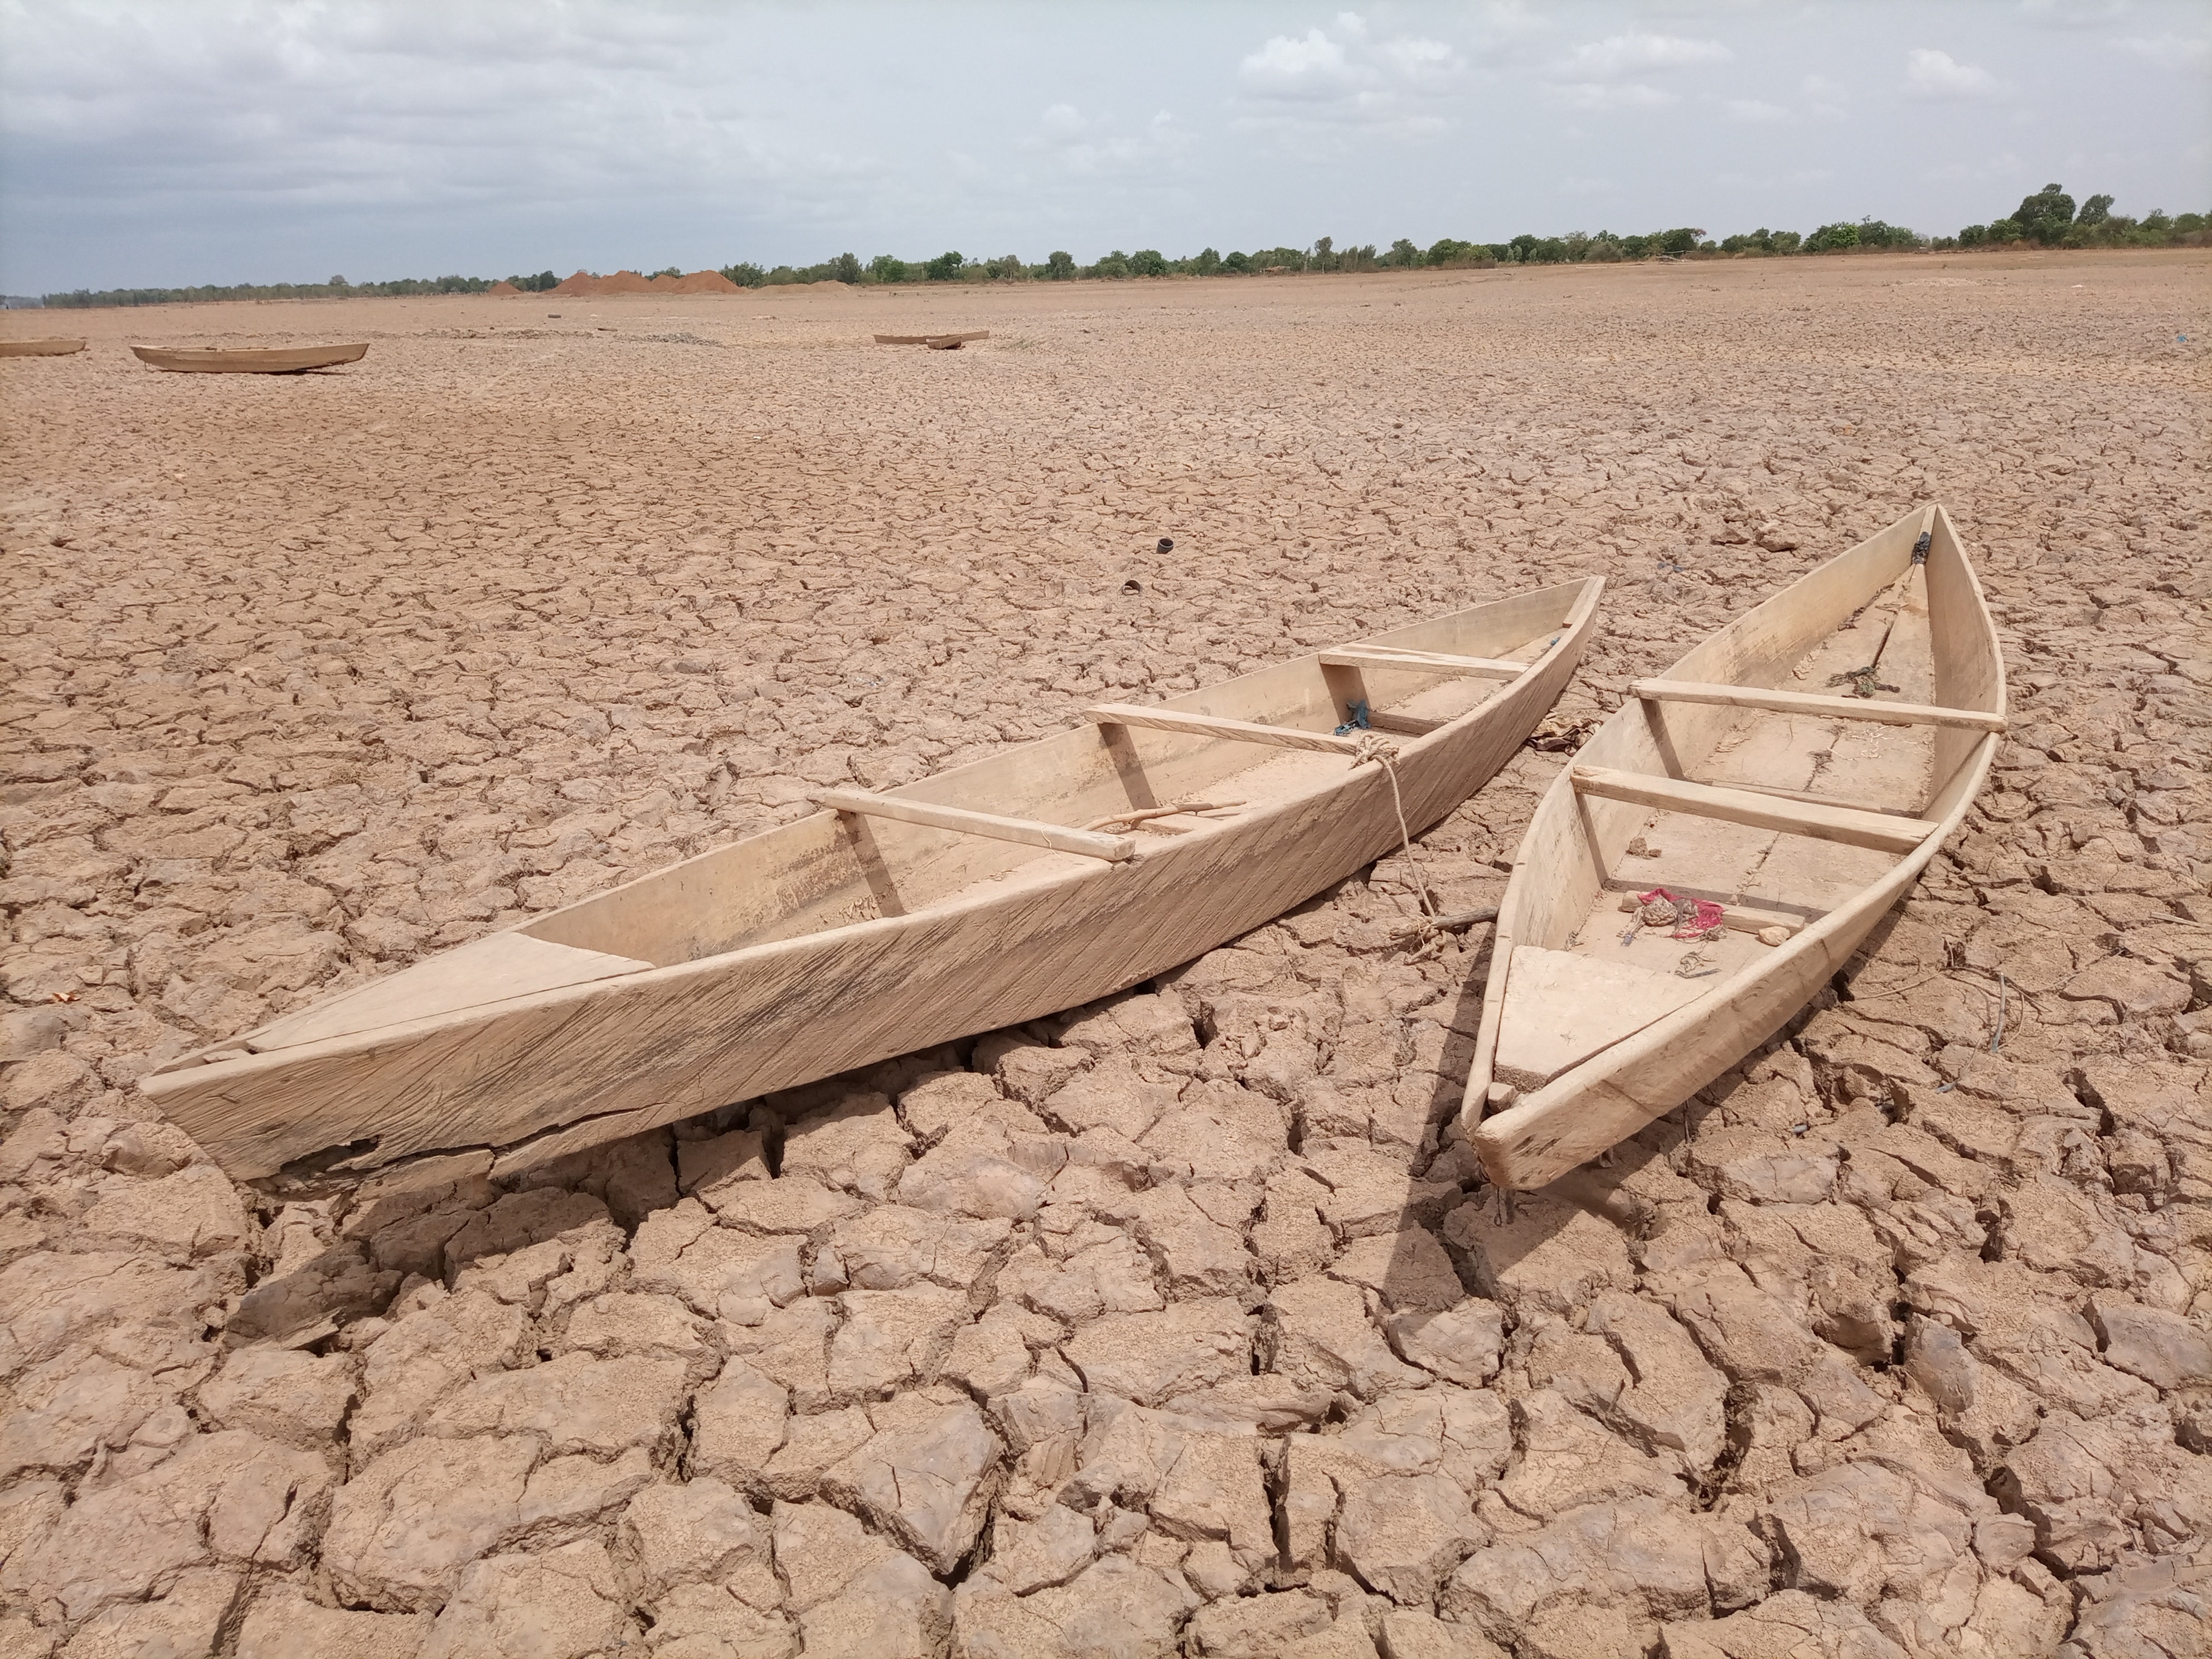 Shifting Climate Zones: Sahel might get 50 % more rain by 2040